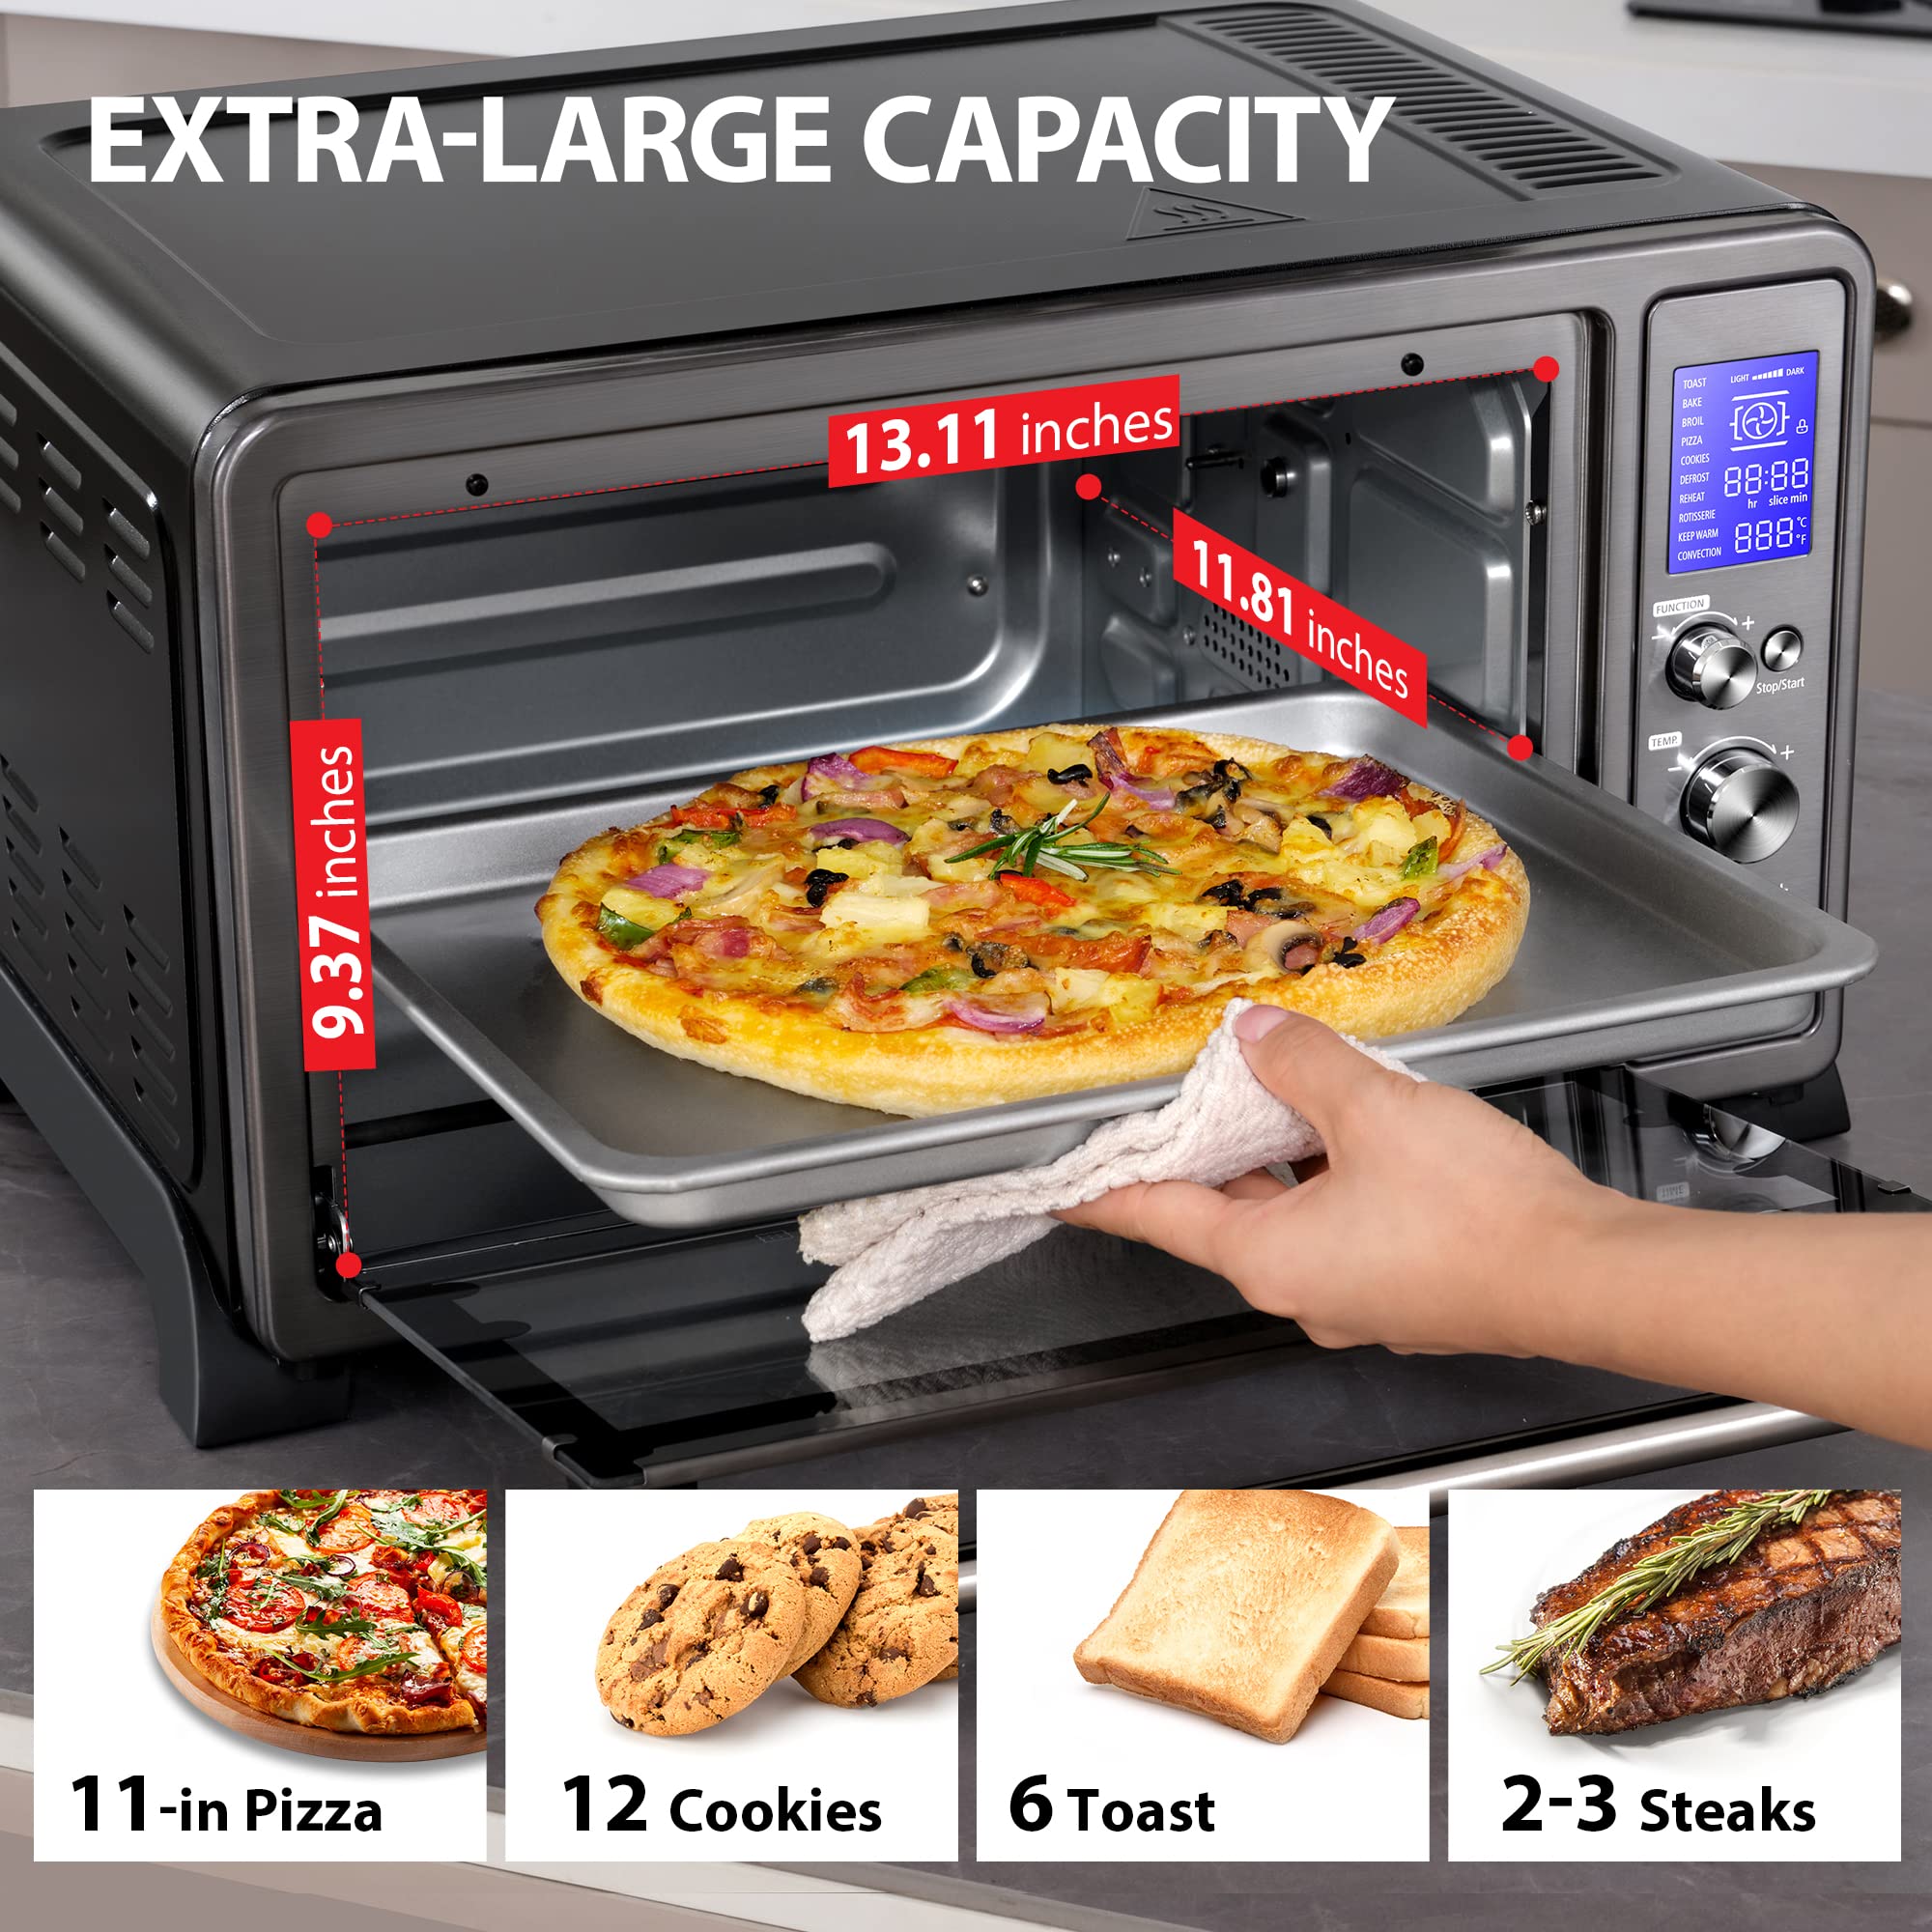 6-Slice 10-in-1 Toshiba Large Convection Countertop Toaster Oven w/ Toast, Pizza, Rotisserie & 6 Accessories (Black Stainless Steel) $62.19 + Free Shipping